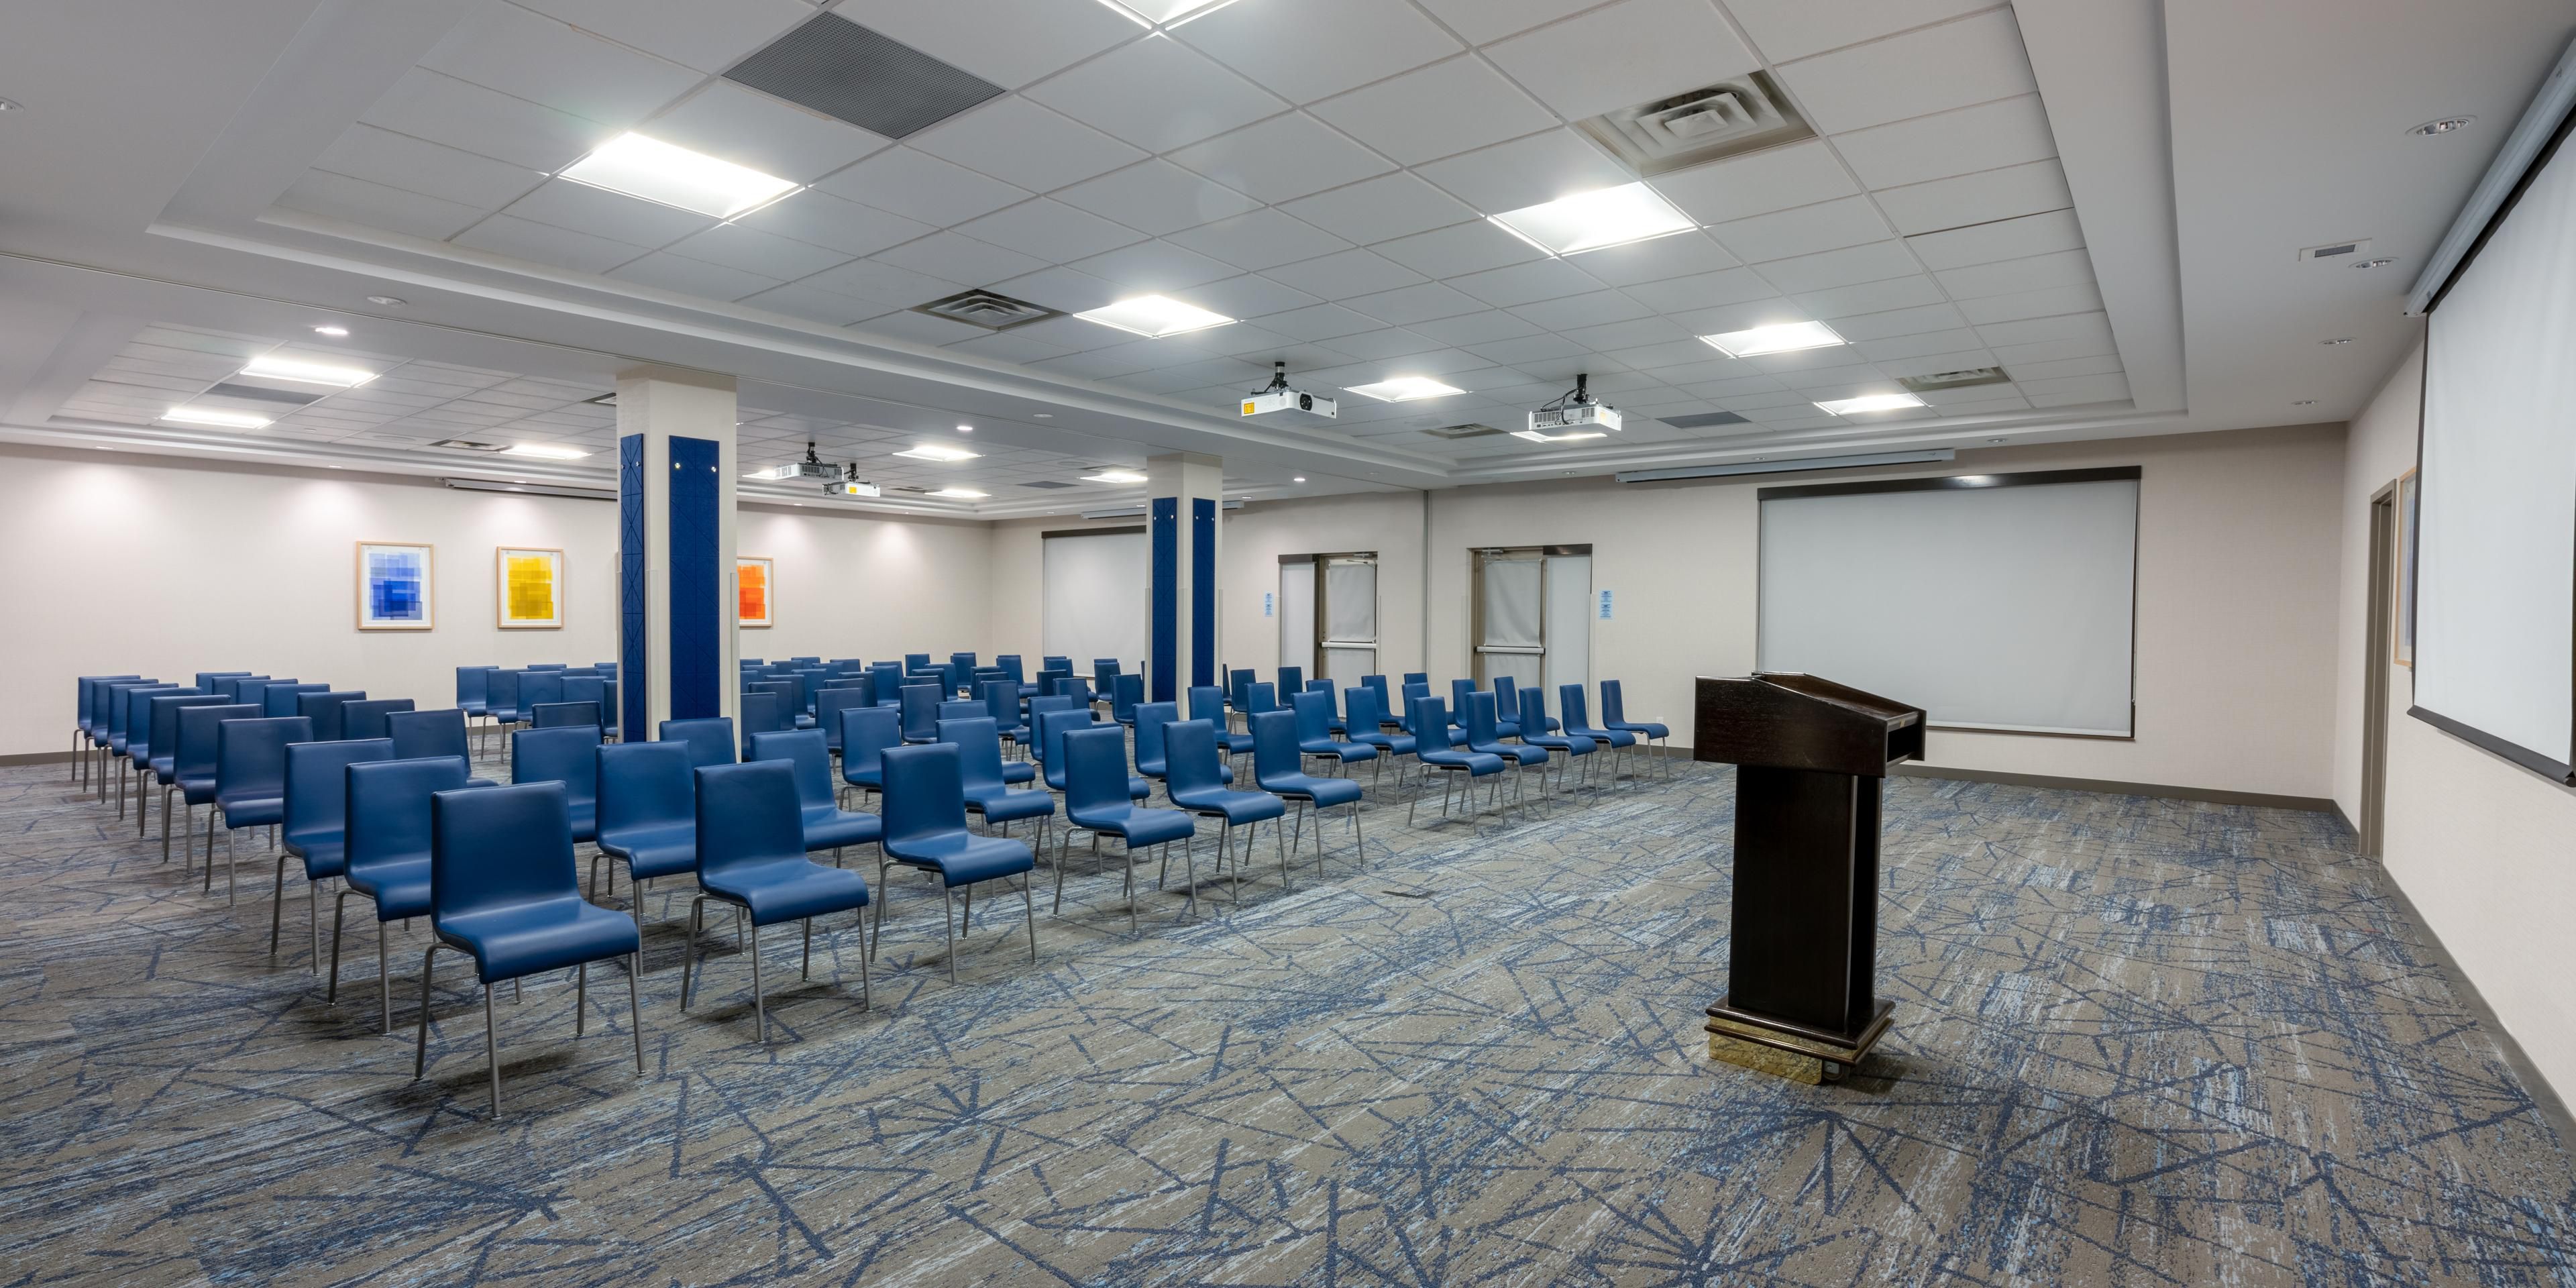 Our meeting rooms feature natural light, flexible set-up, built-in TV for presentations and complimentary Wi-Fi. We offer cost effective Meeting Packages and dedicated event planning staff to help you meet your most important meeting objectives.